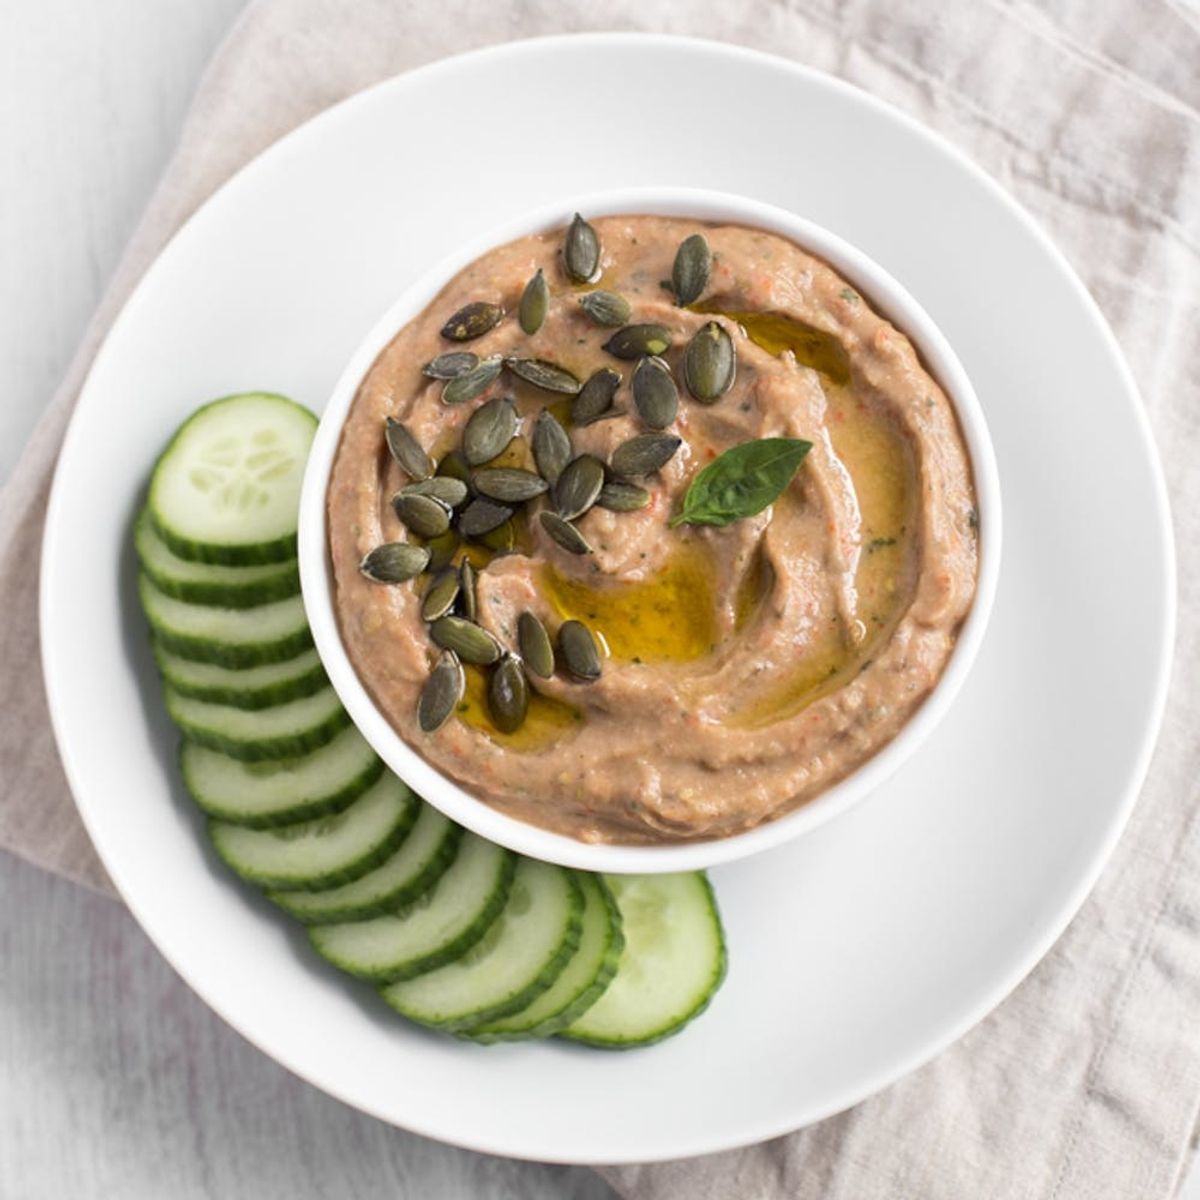 This Roasted Eggplant Dip Is Healthy, Delicious, AND Easy to Make — the Perfect Trifecta!